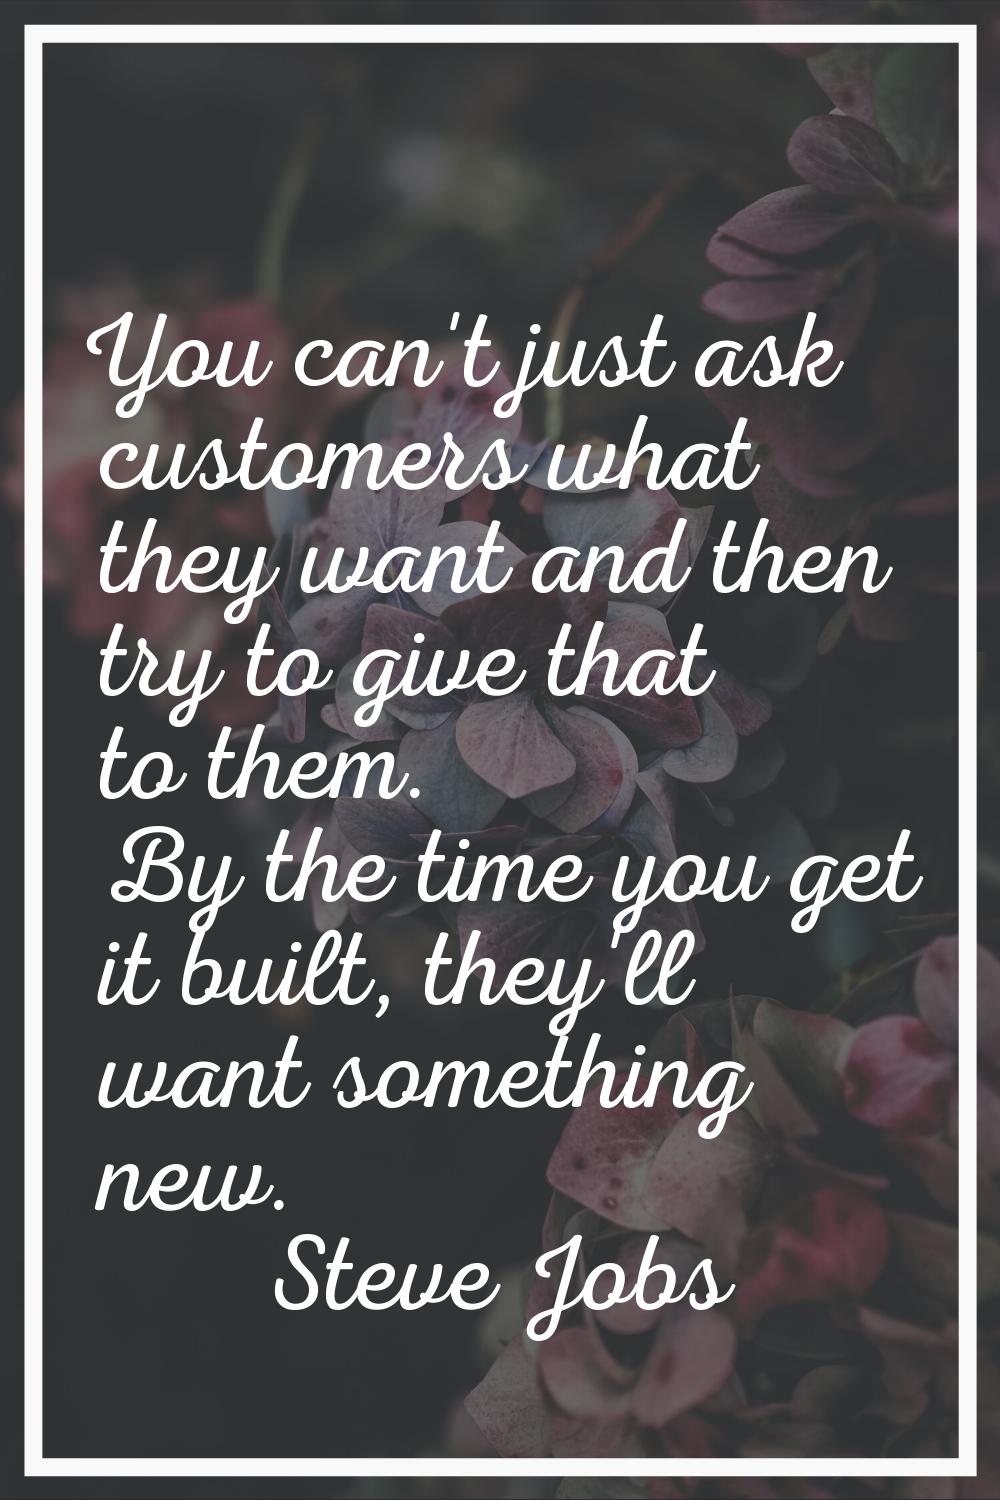 You can't just ask customers what they want and then try to give that to them. By the time you get 